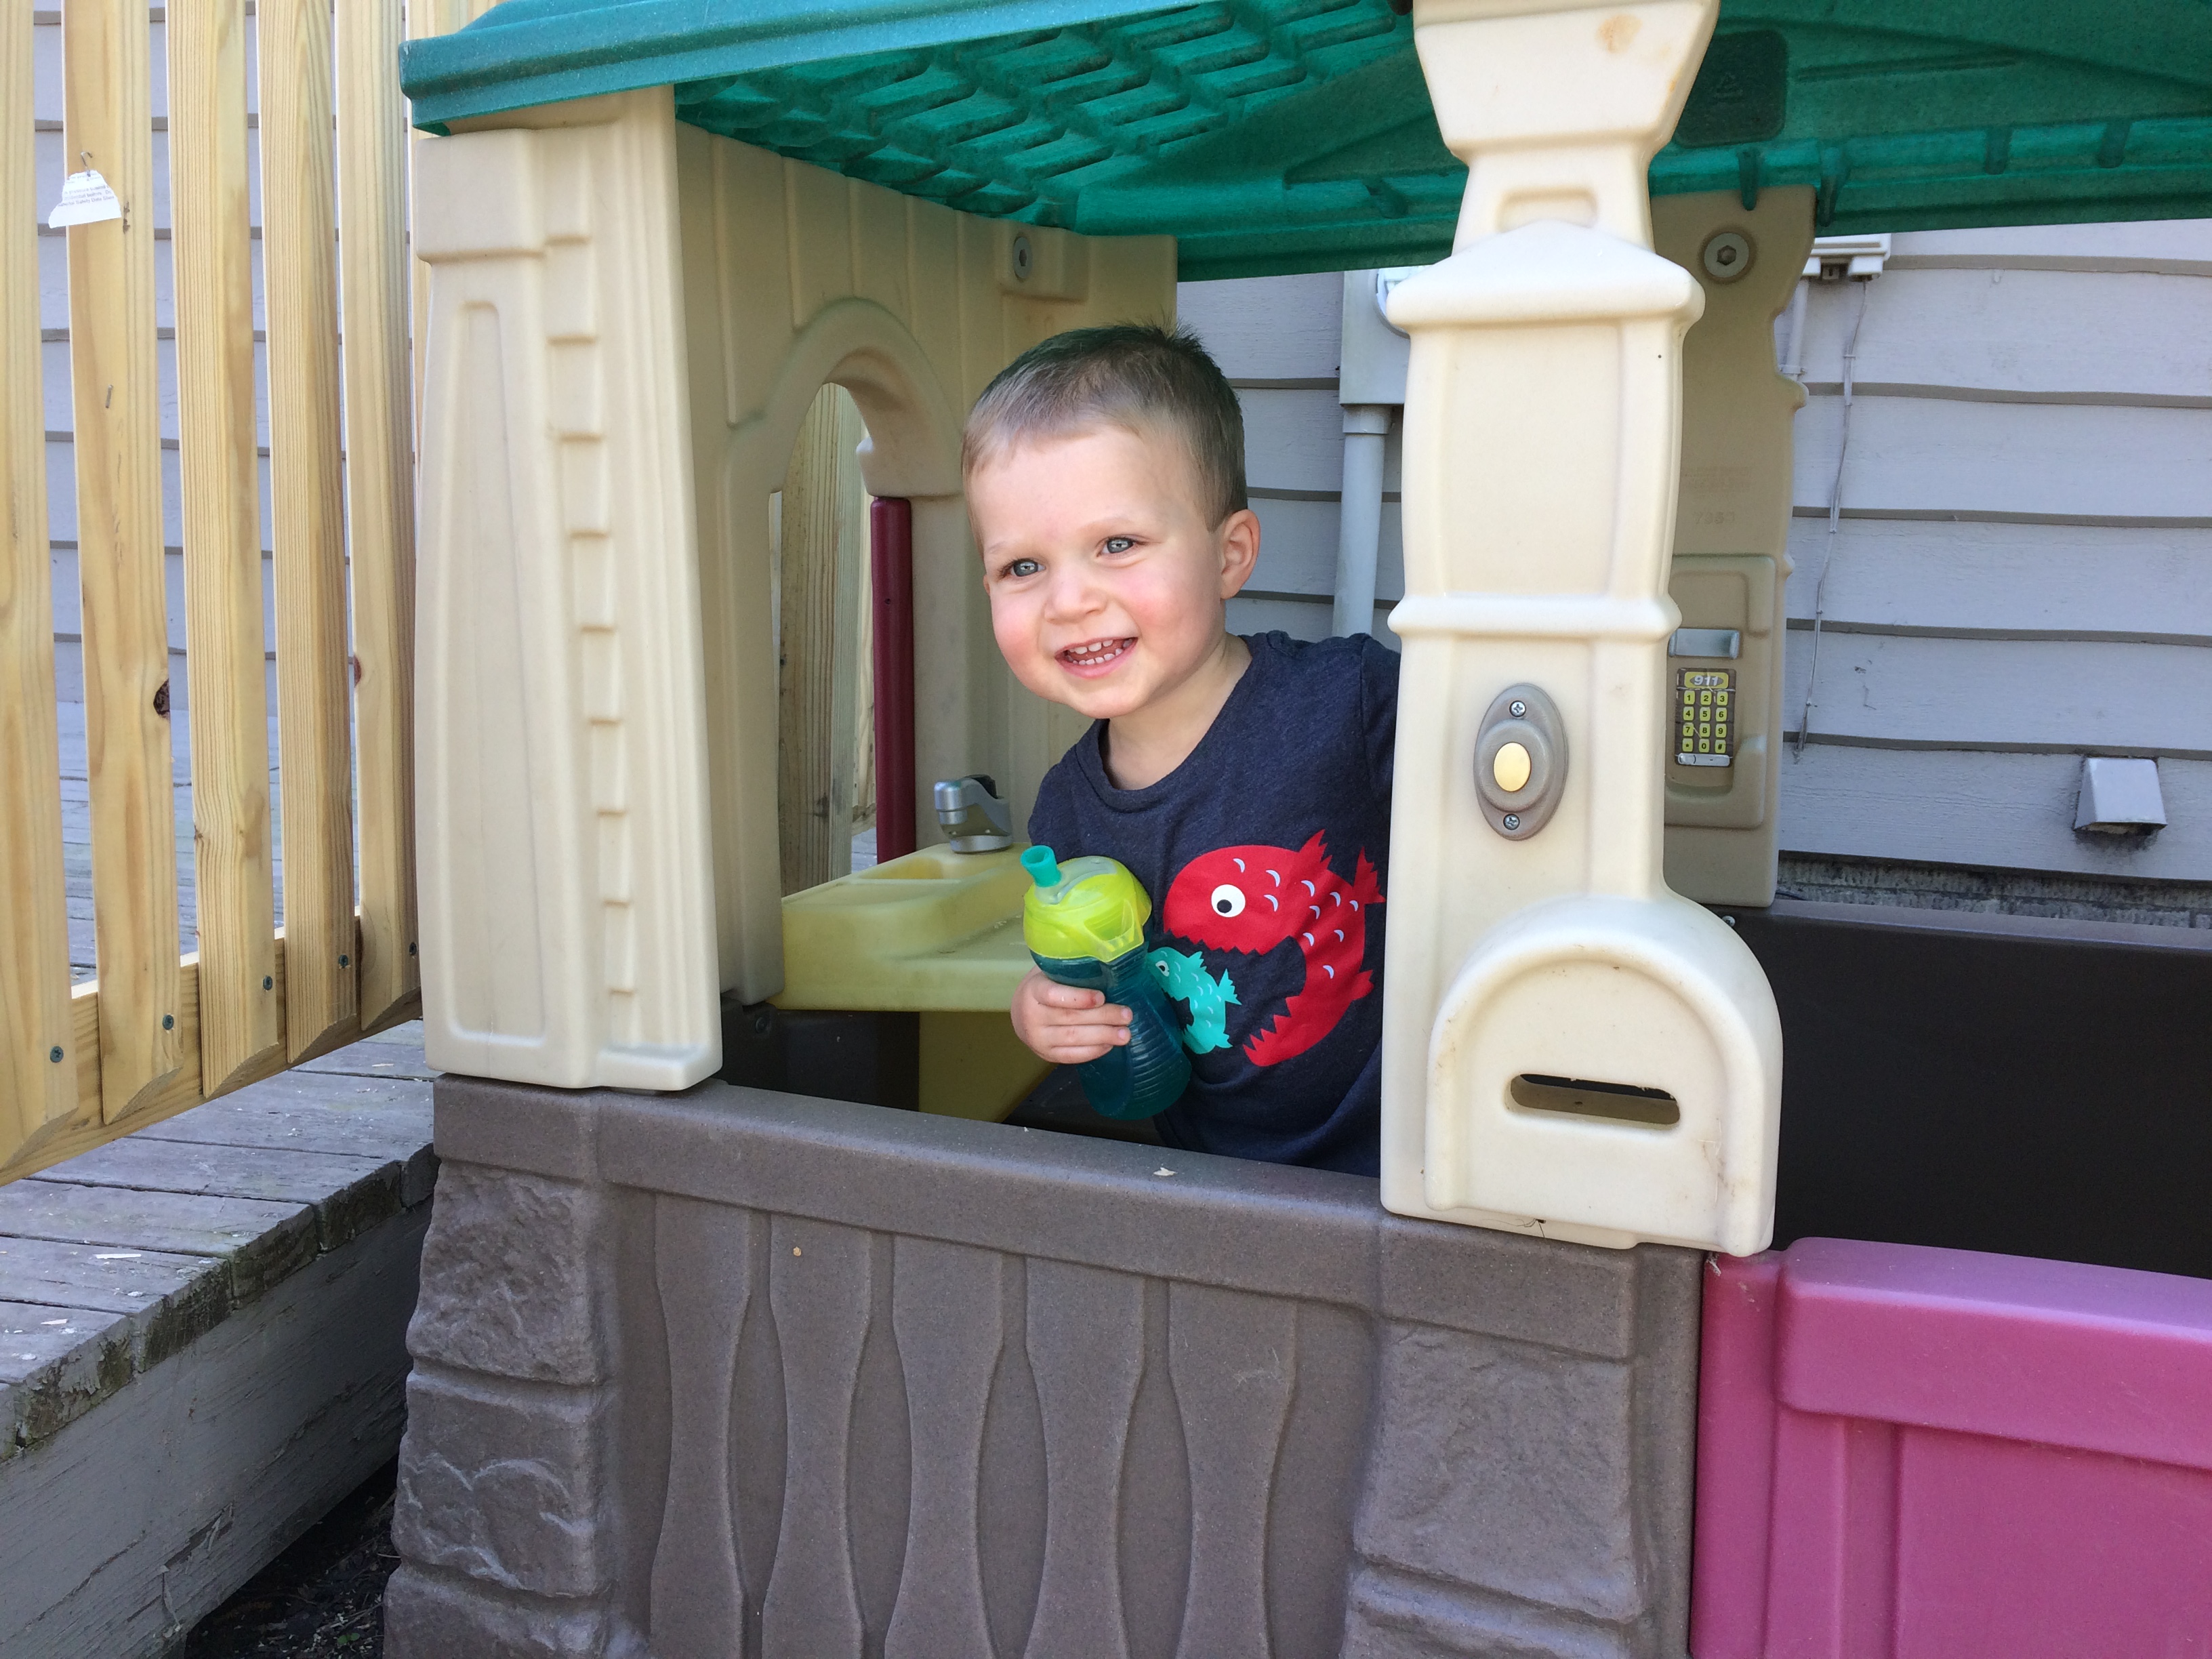 A young boy playing outside in a play house